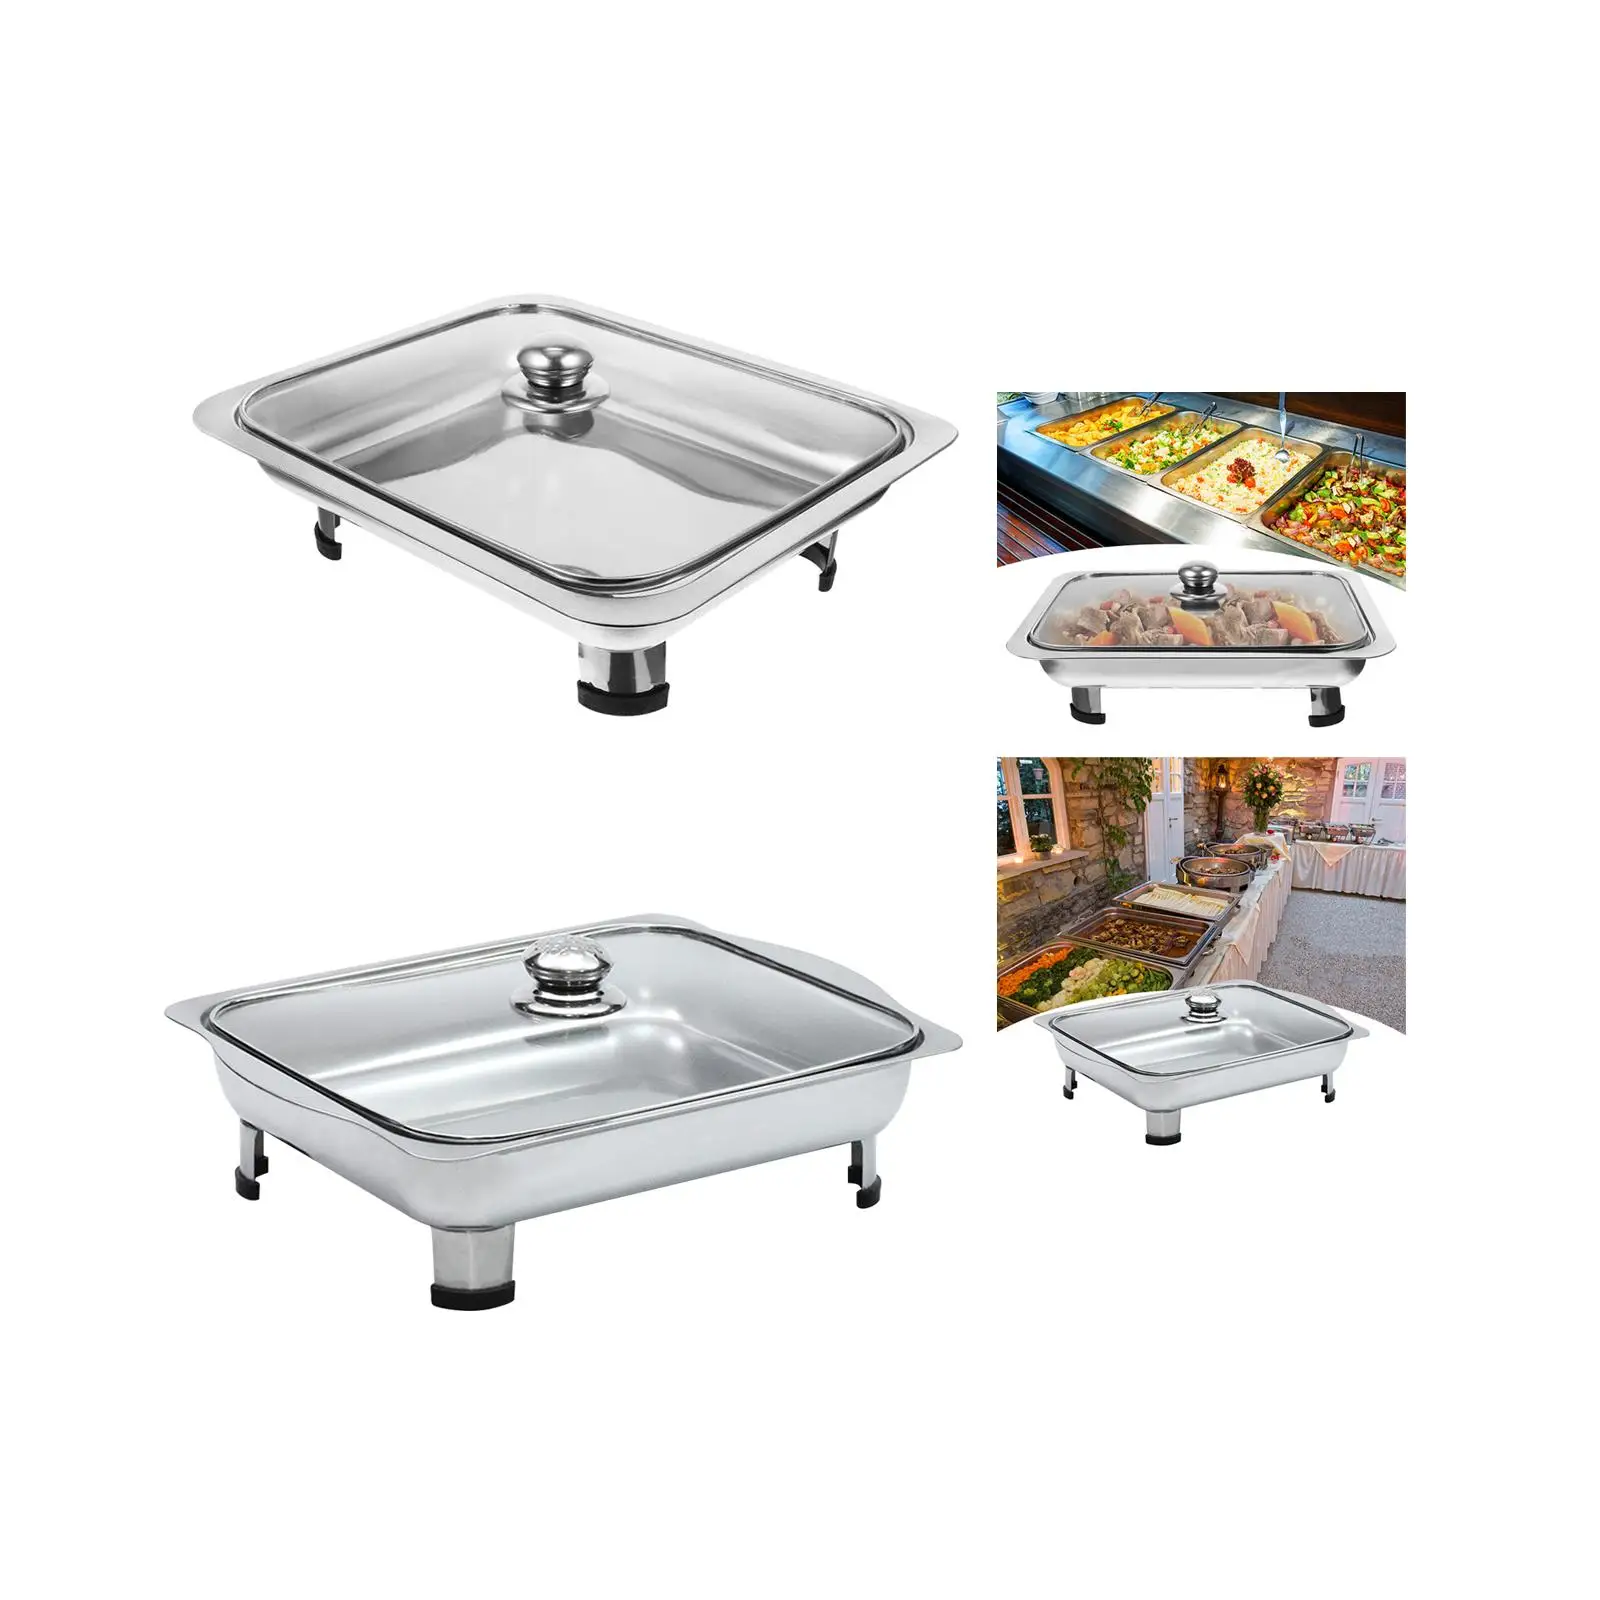 Buffet Dish Tray Food Warmer Transparent Cover Chafing Dish Stainless Steel Chafer for Picnic Wedding Parties Holidays Banquet